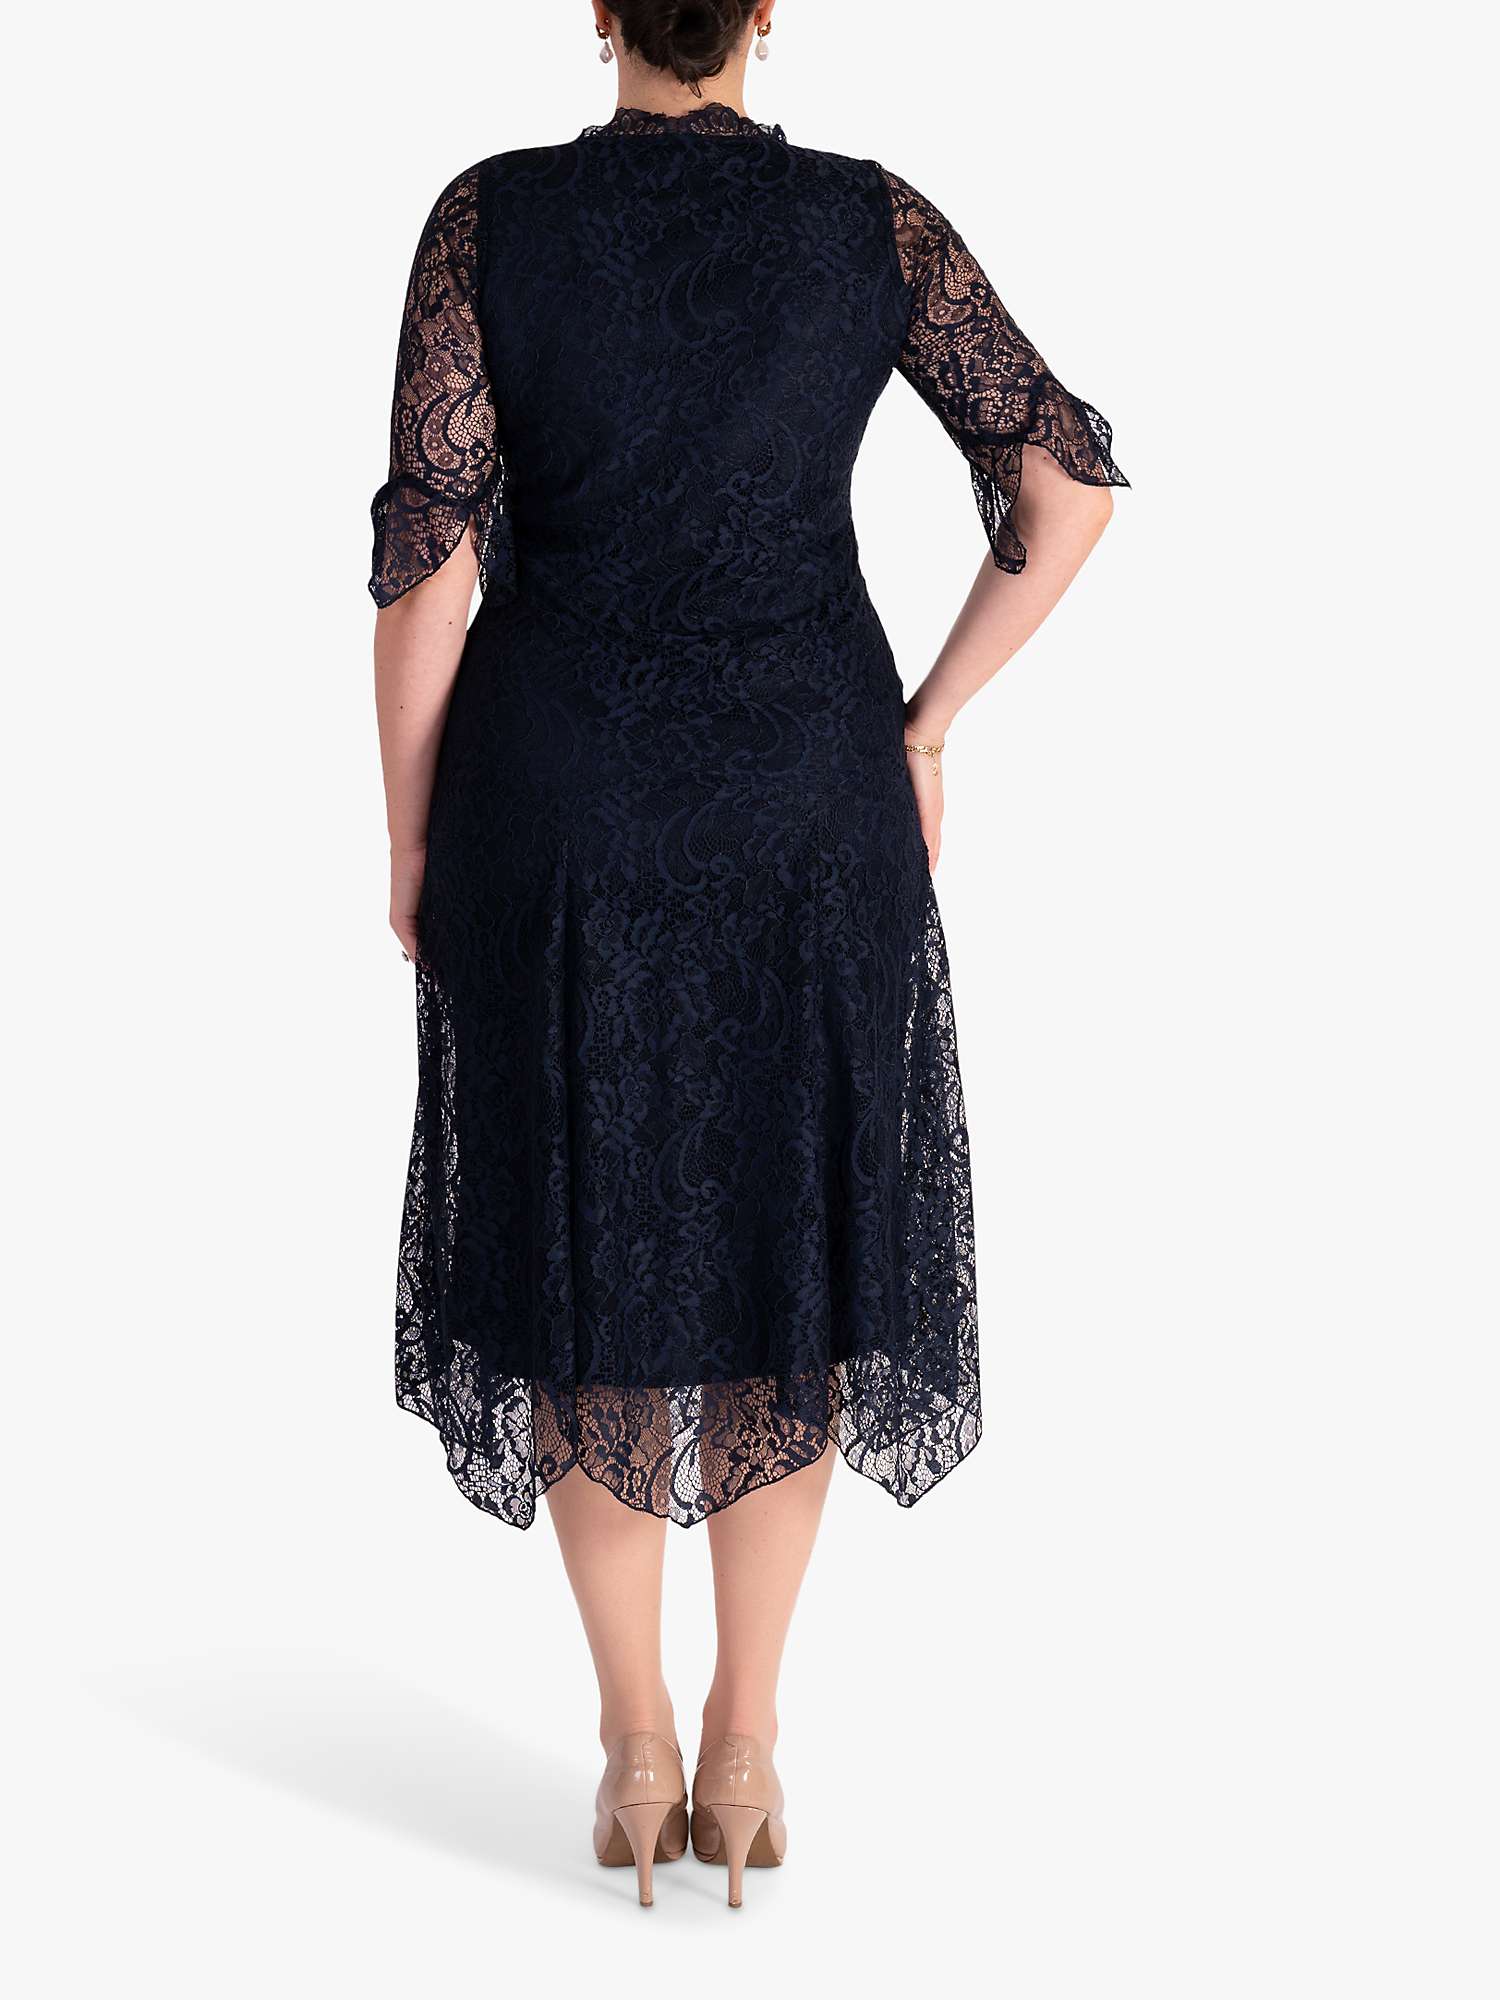 Buy chesca Lace Dress, Navy Online at johnlewis.com